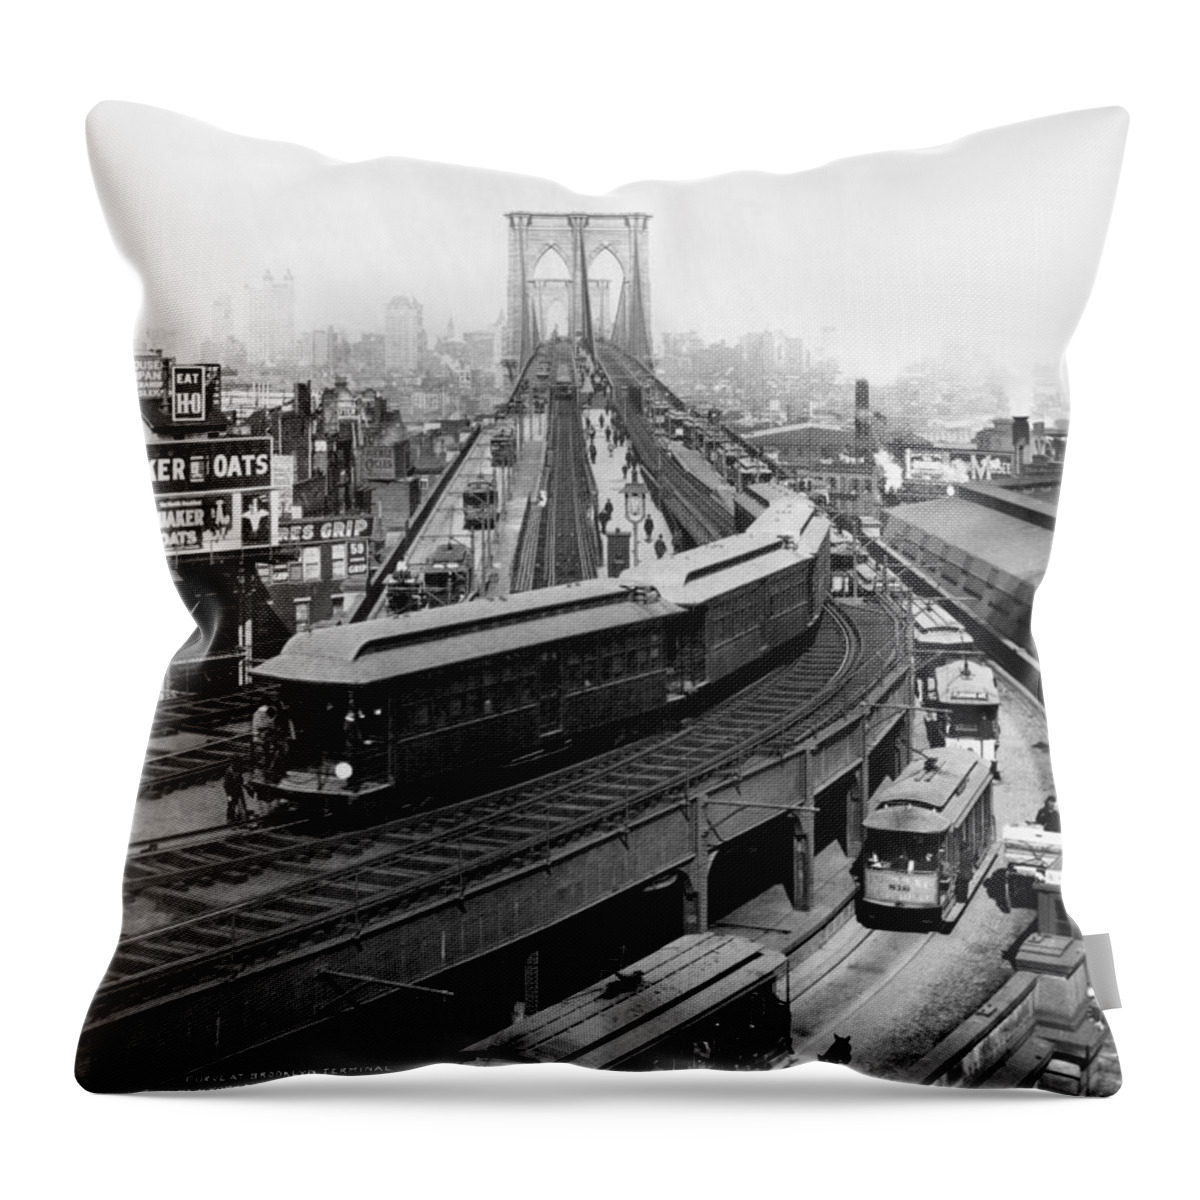 1898 Throw Pillow featuring the photograph Ny: Brooklyn Bridge, 1898 by Granger